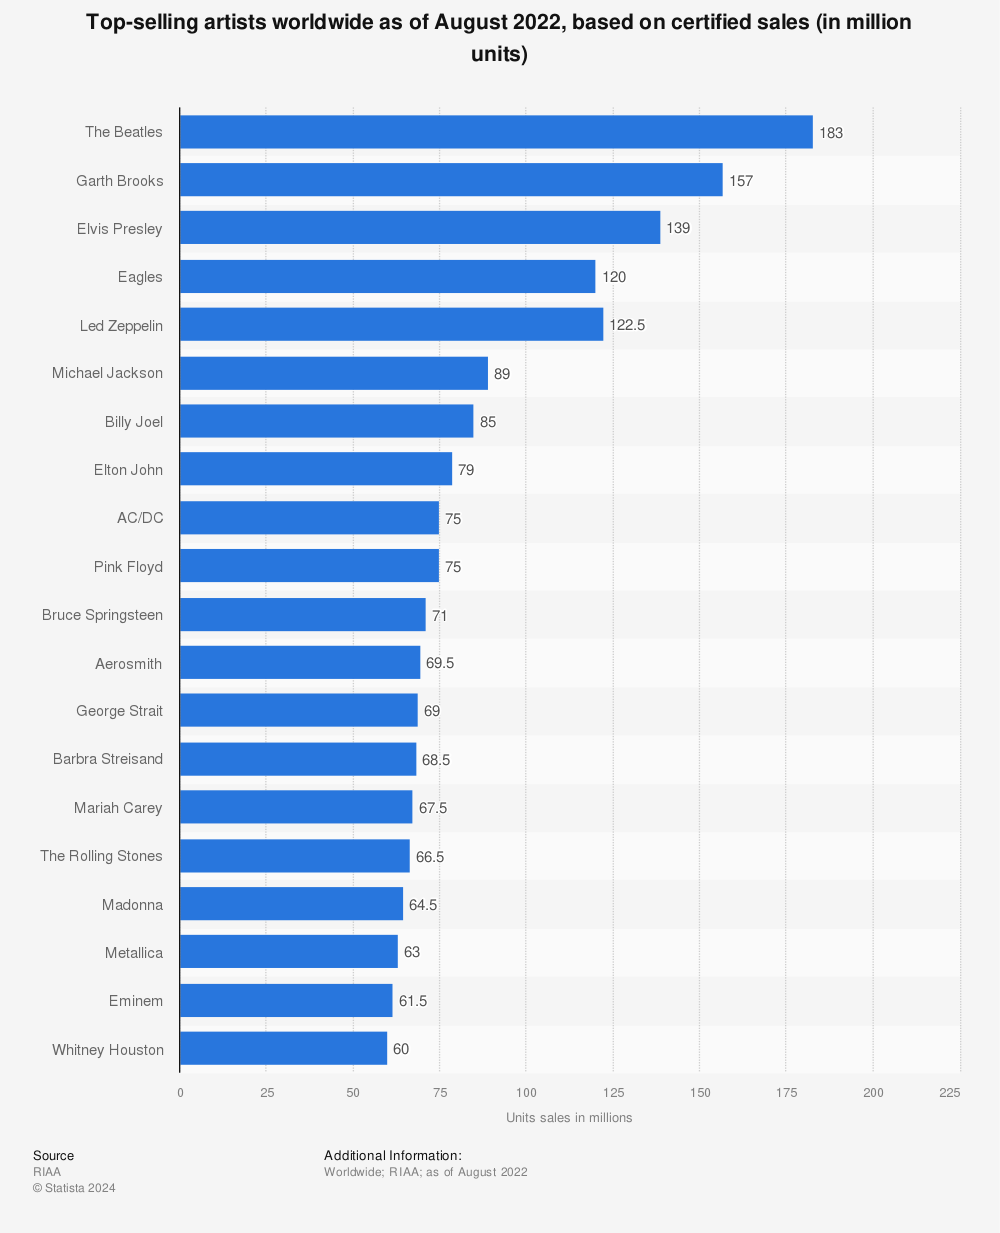 Envision Posterity piece Top-selling artists of all time worldwide | Statista